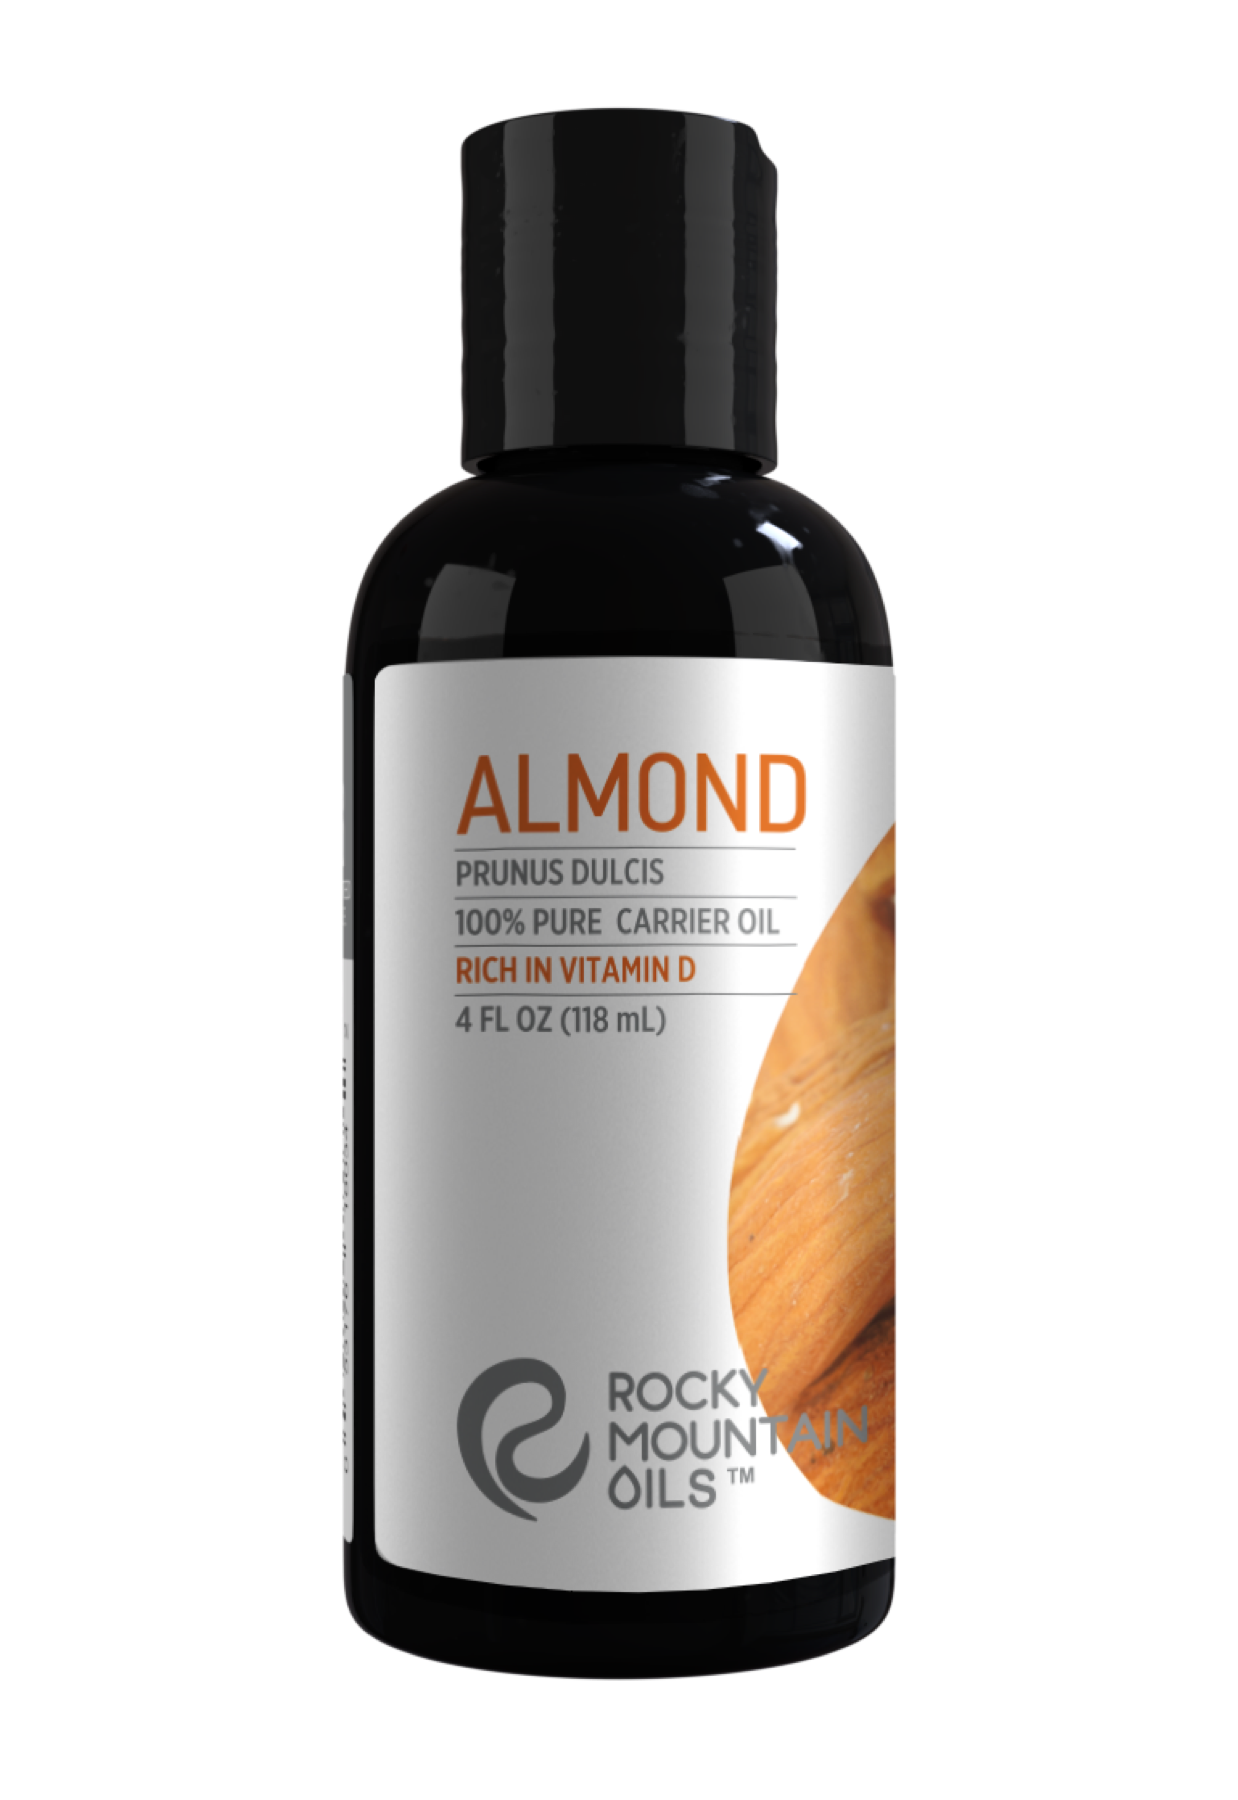 Natural Sweet Almond Carrier Oil with Antioxidant Vitamin E - Aromatherapy  (4 fl. oz.) at the Vitamin Shoppe